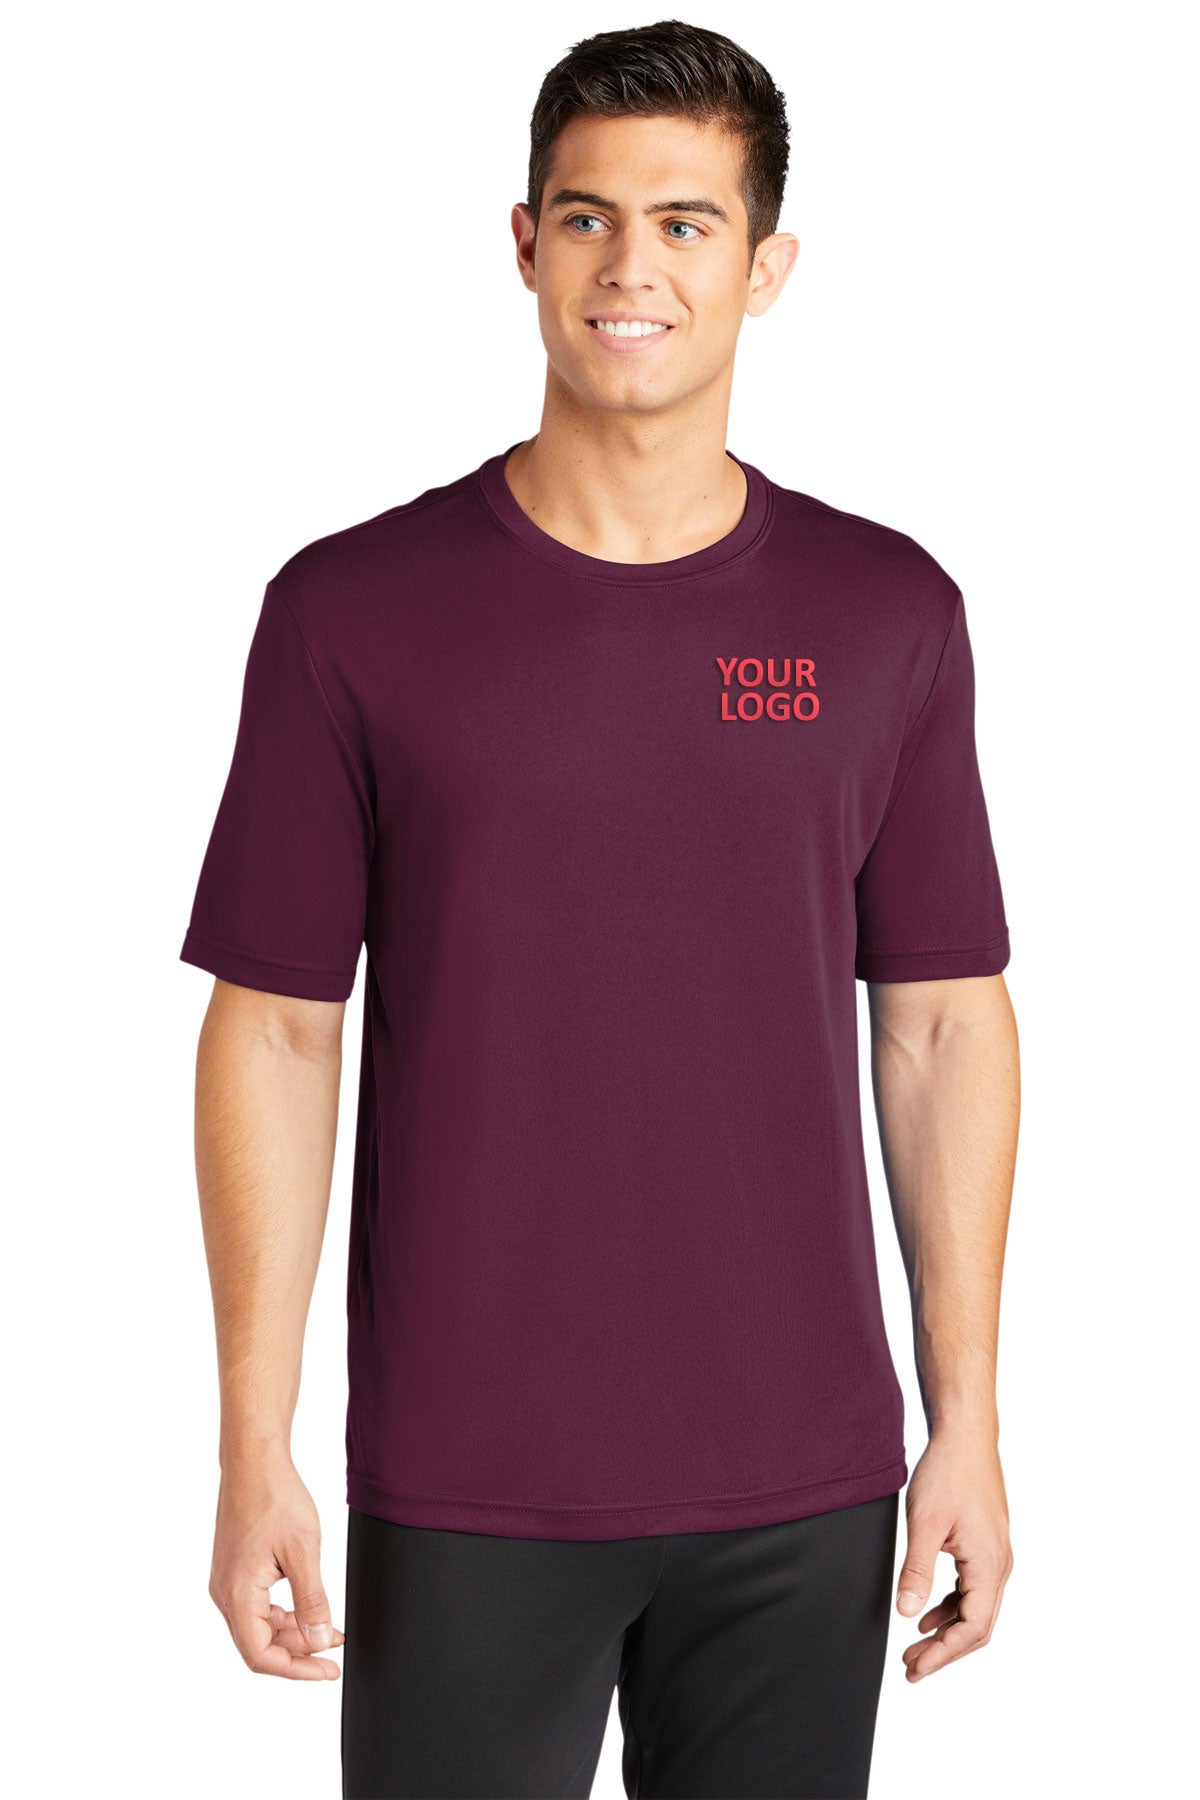 Sport-Tek Tall PosiCharge Customized Competitor Tee's, Maroon